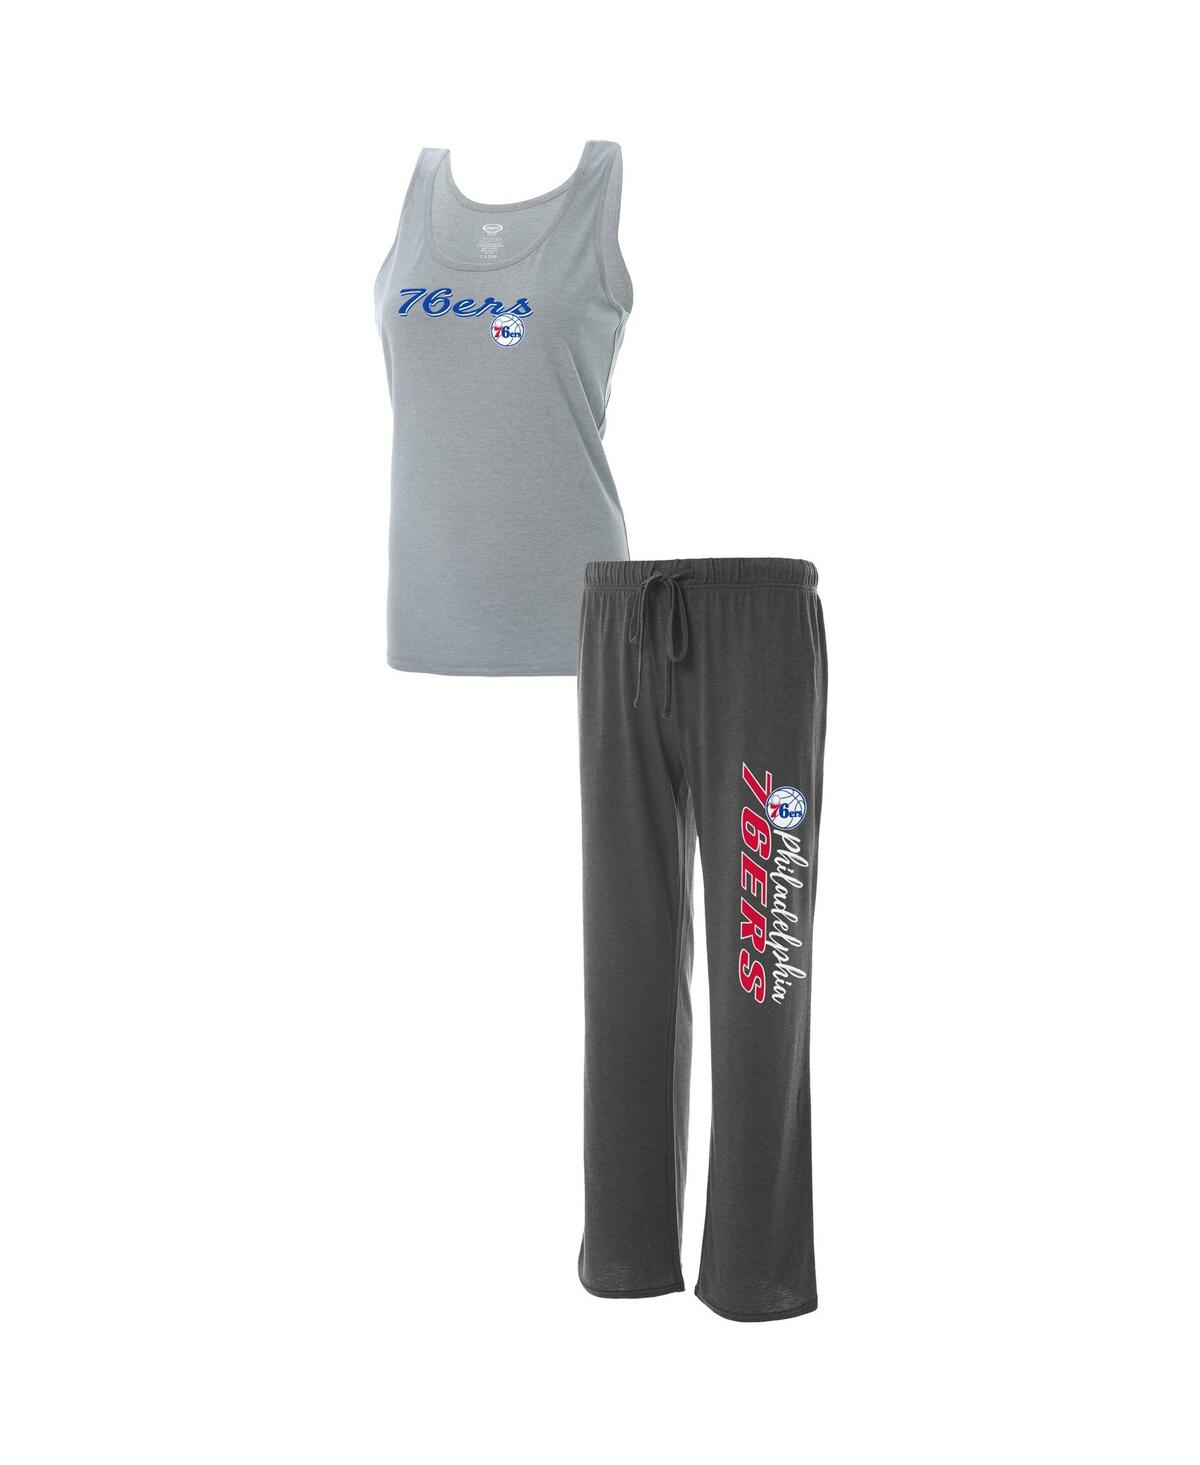 Concepts Sport Women's Heathered Gray, Heathered Charcoal Philadelphia 76ers Plus Size Tank Top And Pants Sleep Set In Heathered Gray,heathered Charcoal